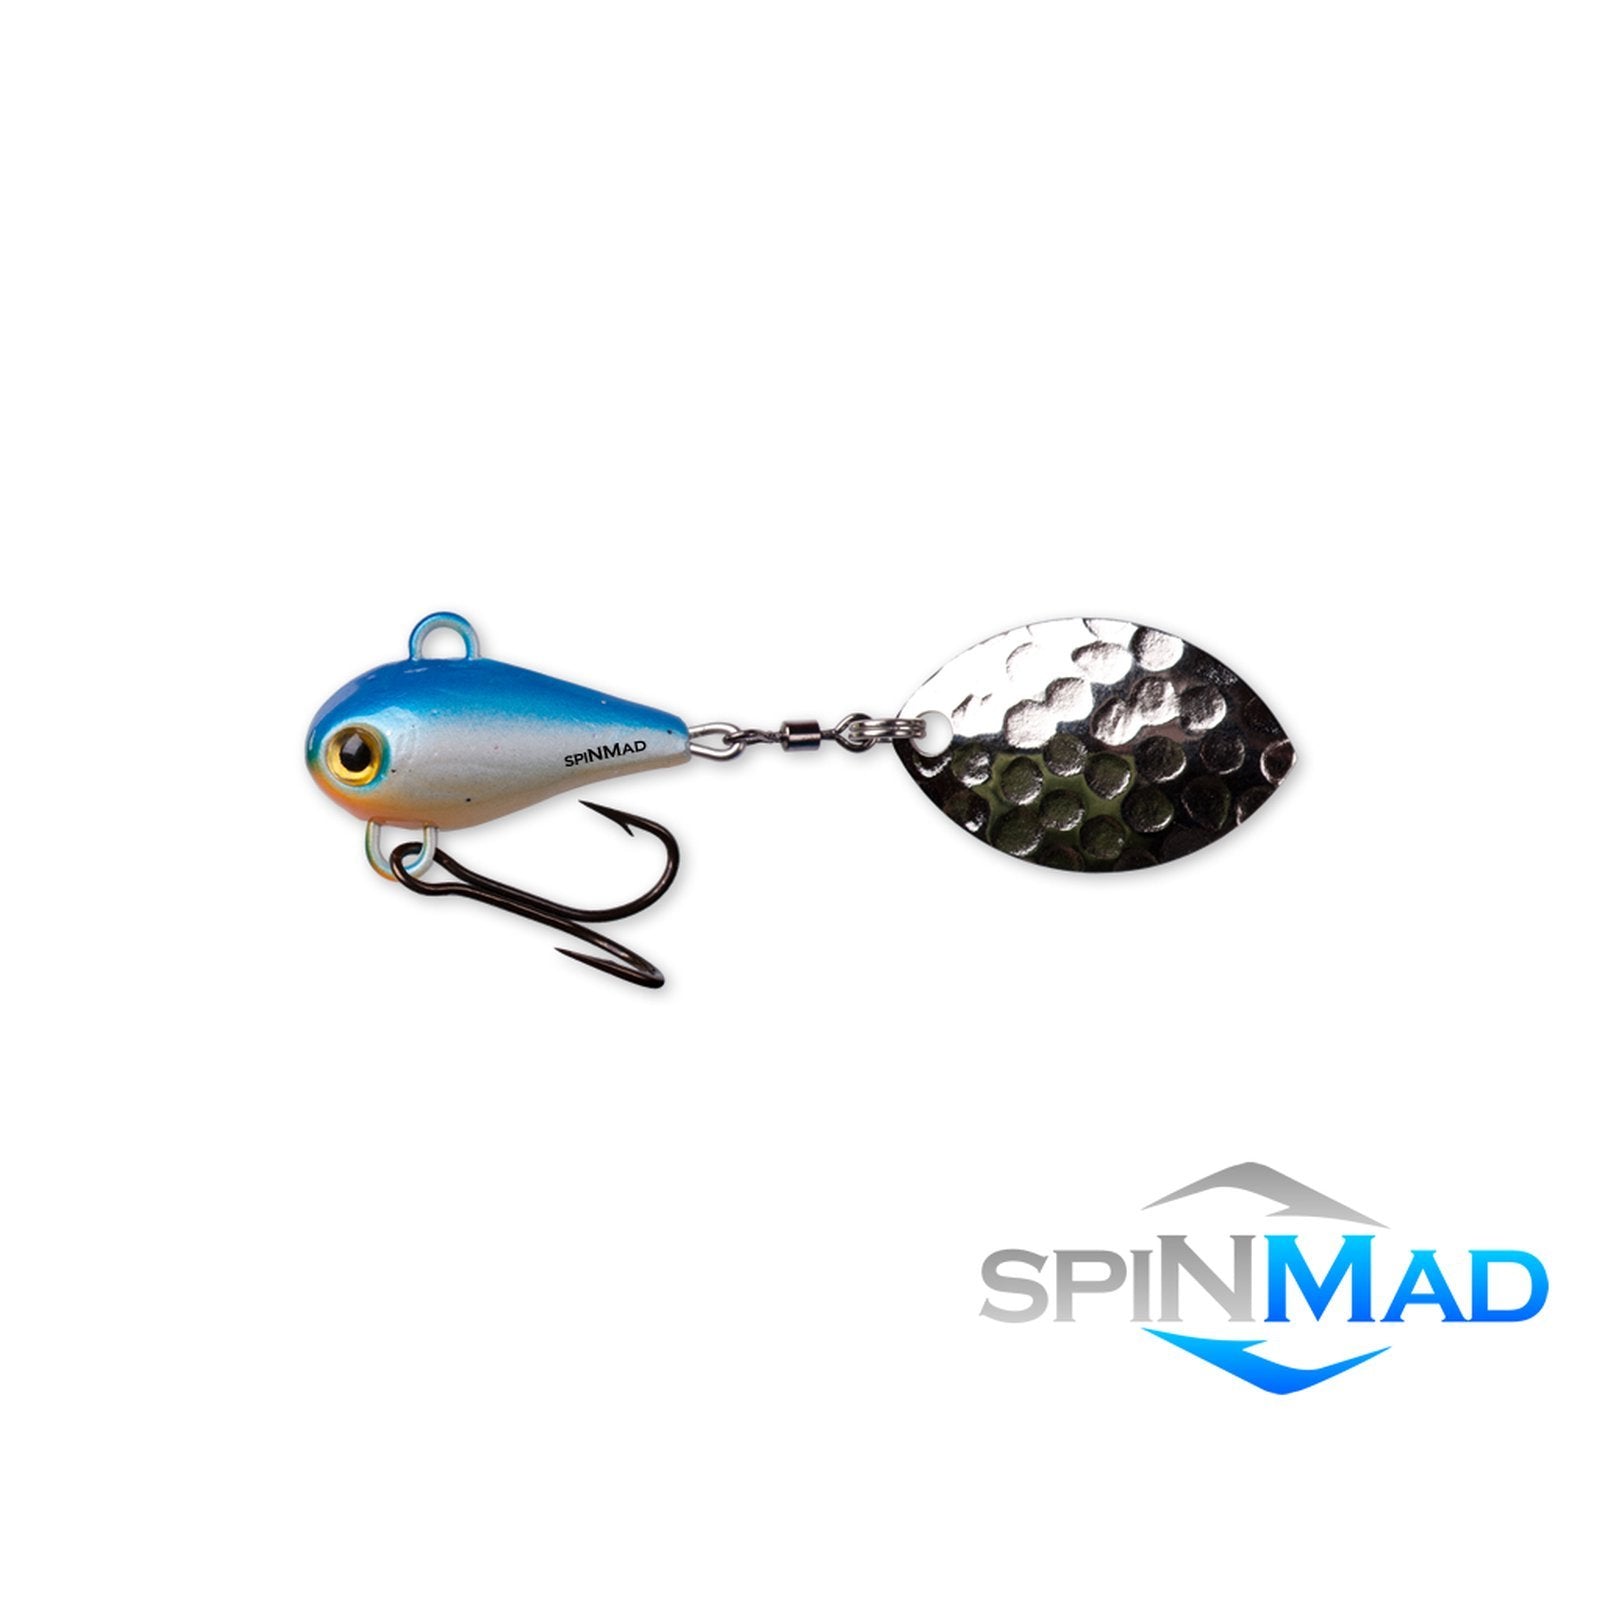 SpinMad MAG 6 0711